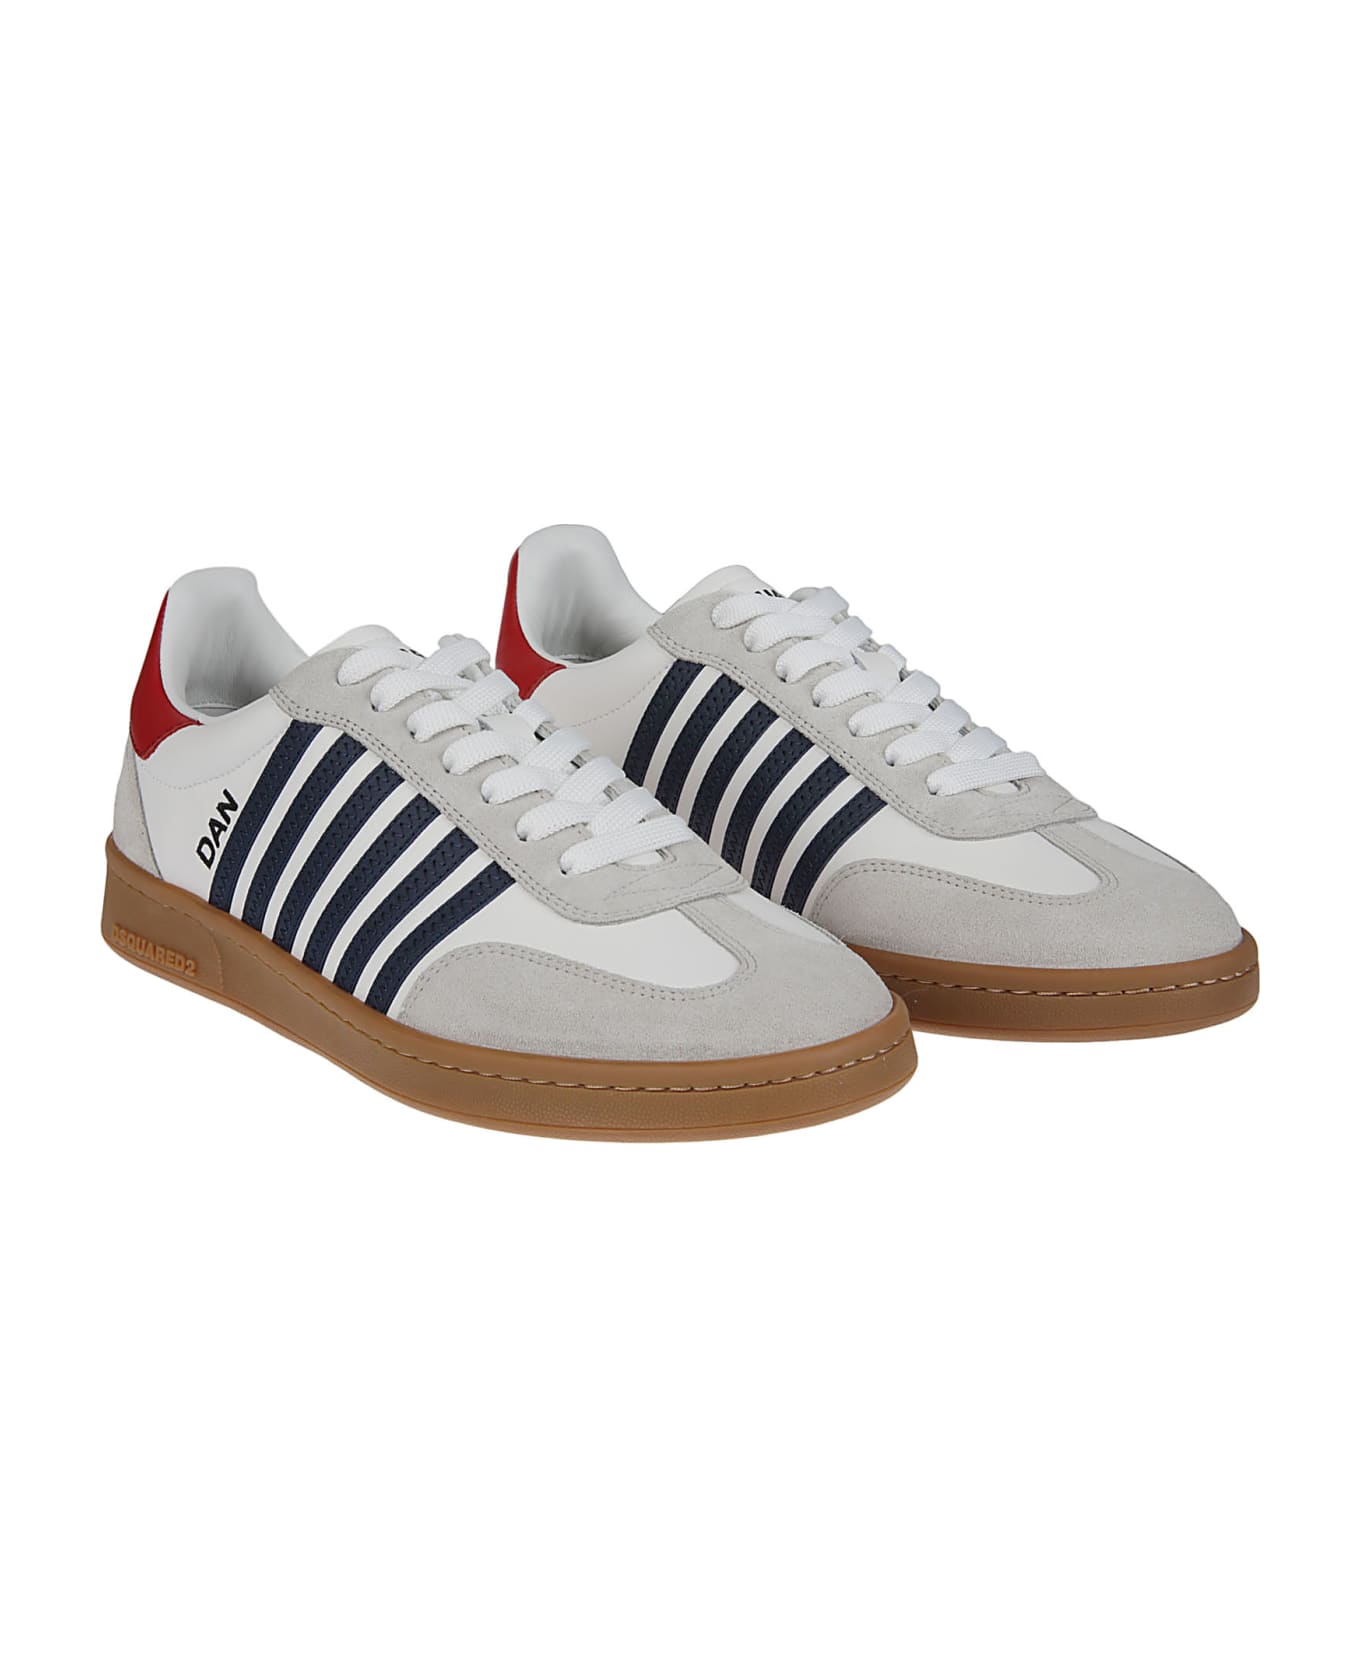 Dsquared2 Boxer Sneakers - Bianco/blu/rosso スニーカー